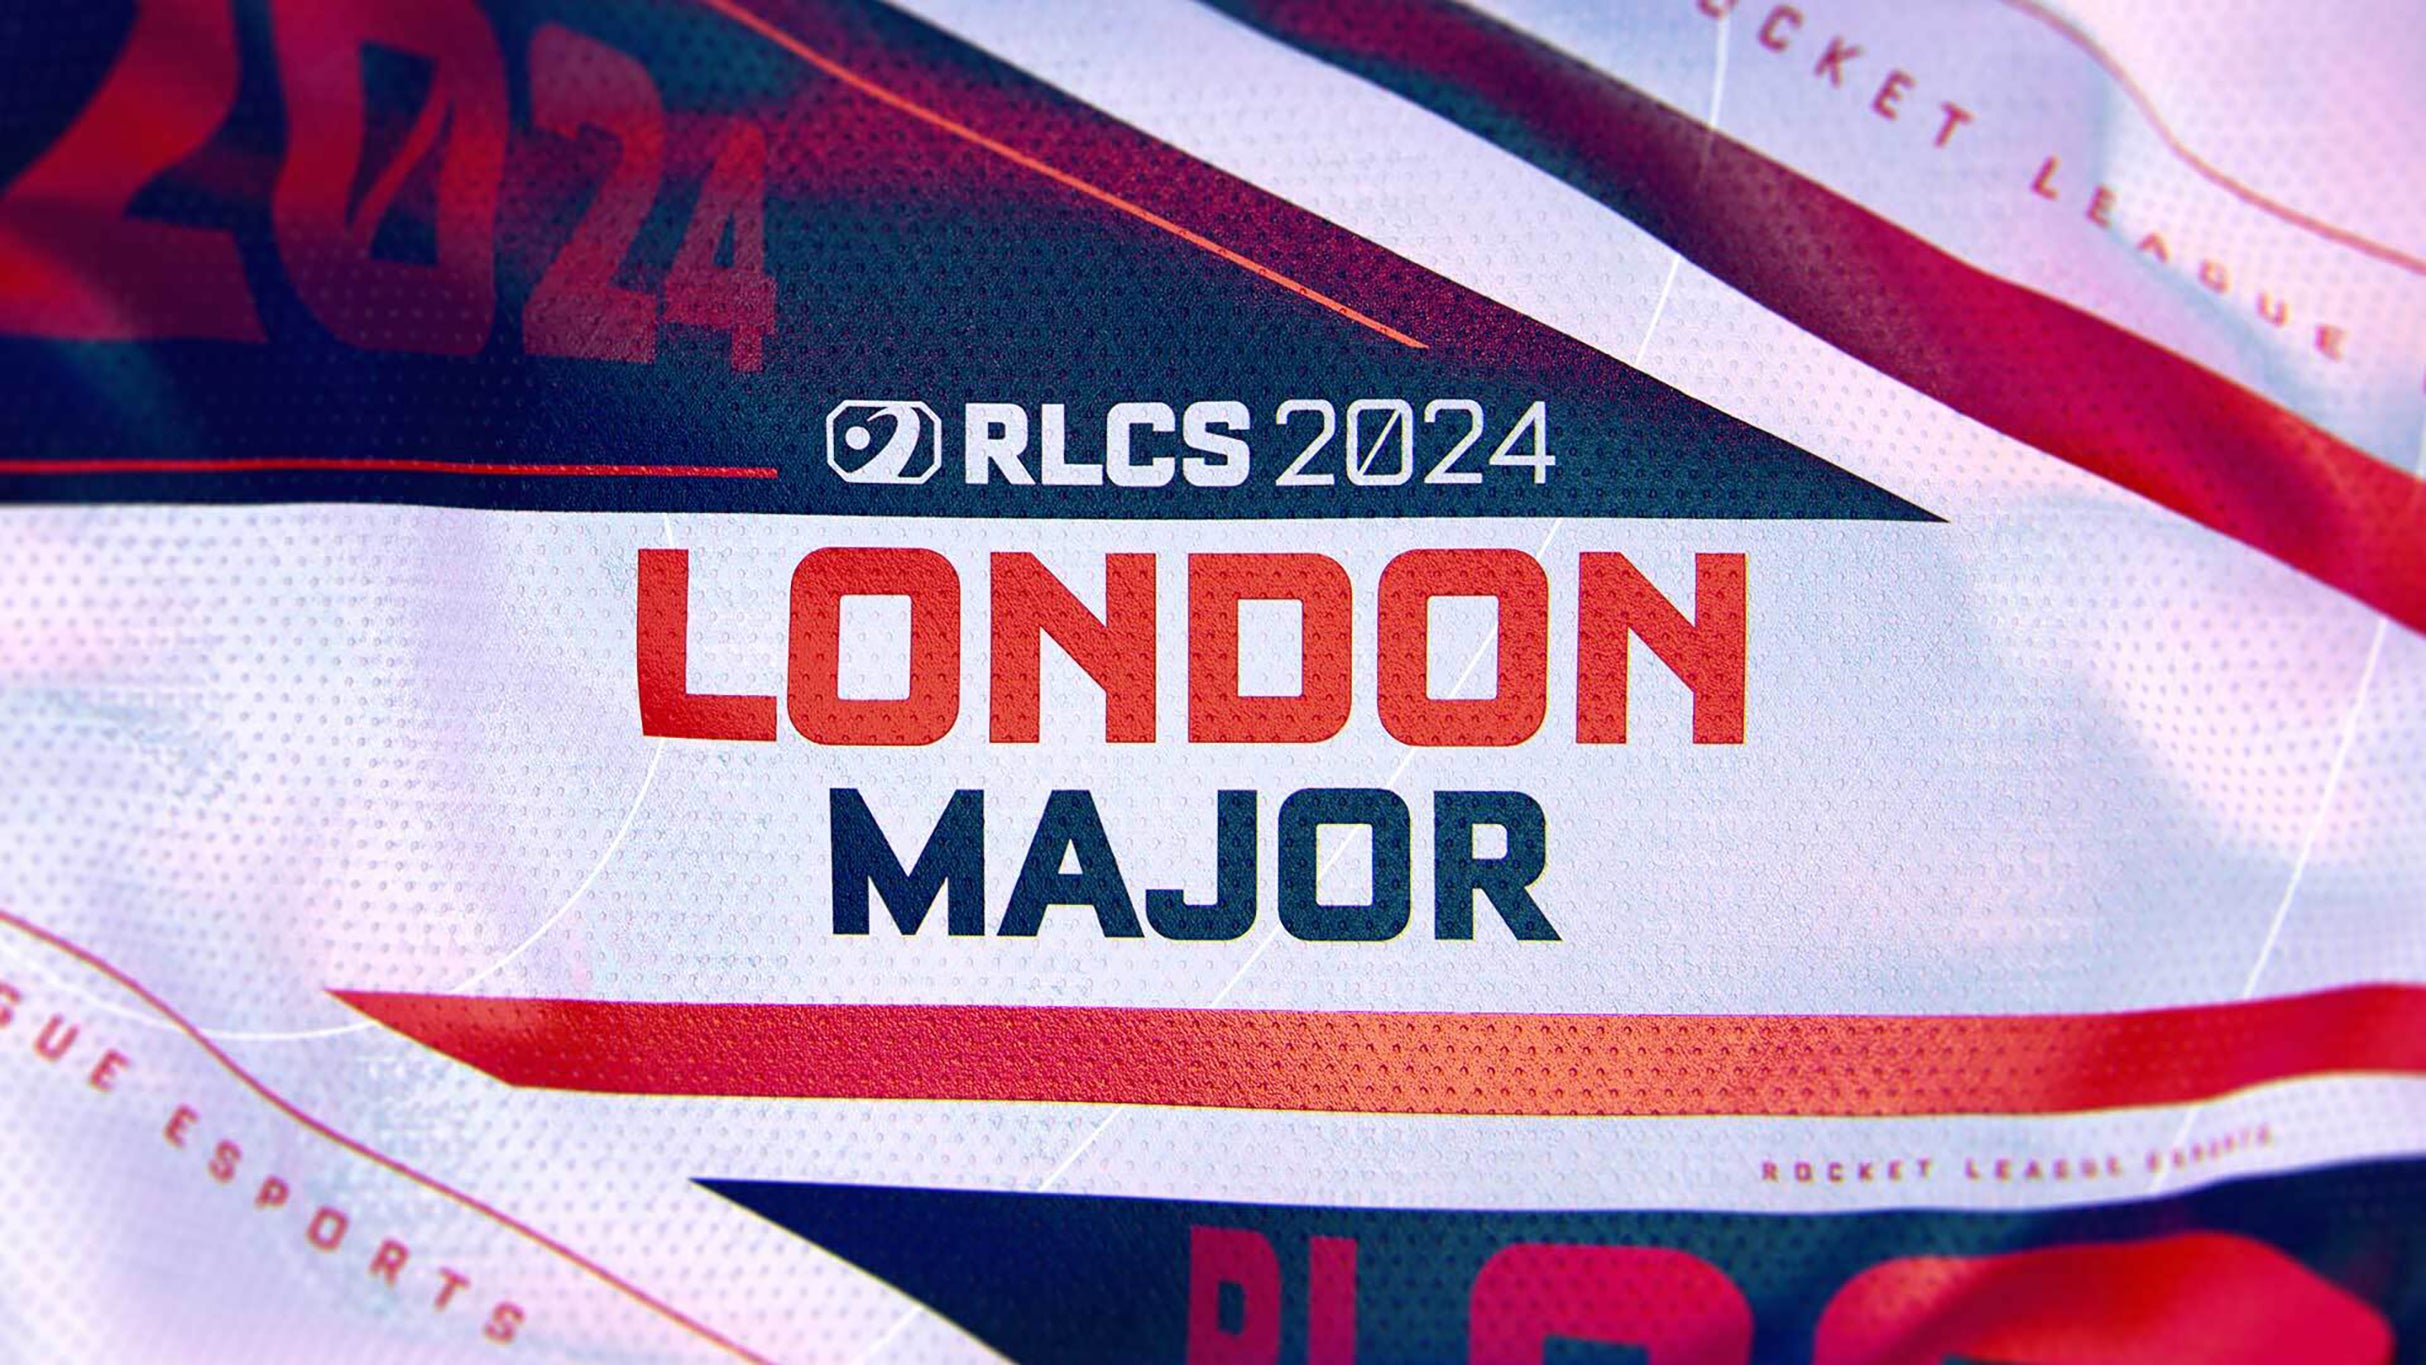 Rocket League Championship Series - Major 2, London - WEEKEND TICKET in London promo photo for Exclusive presale offer code